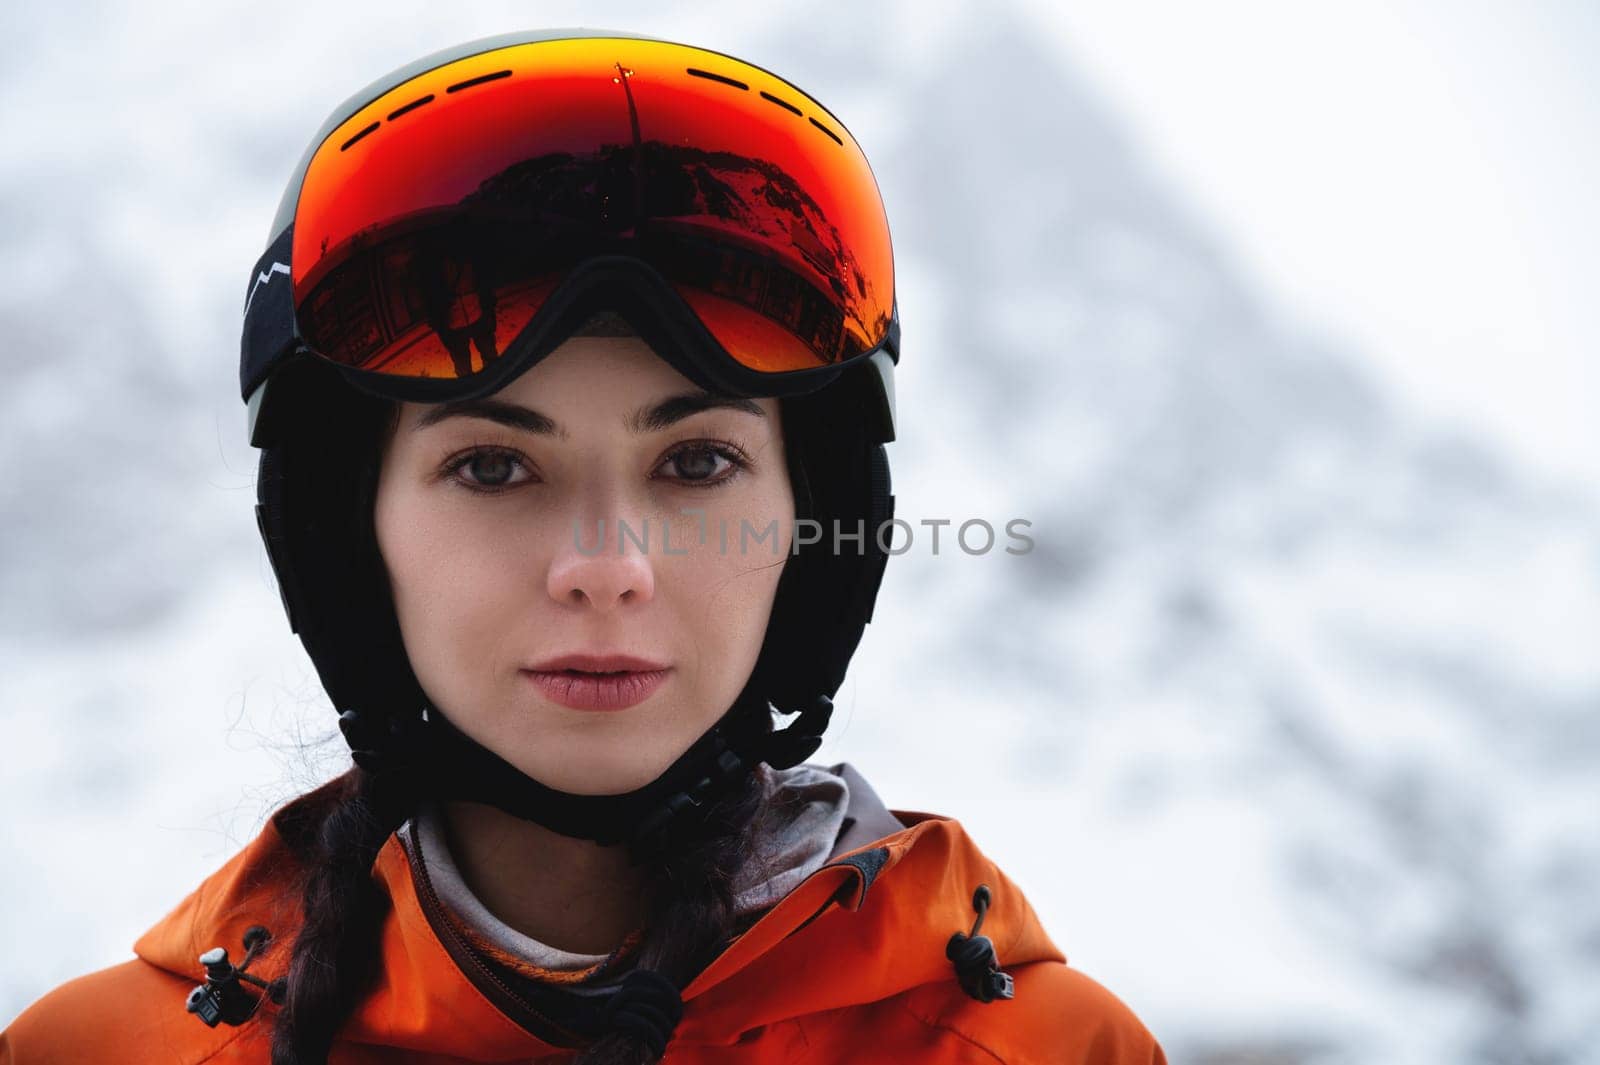 Woman skier on the slope of a mountain resort. Portrait of a young woman smiling in ski equipment, goggles and a helmet.